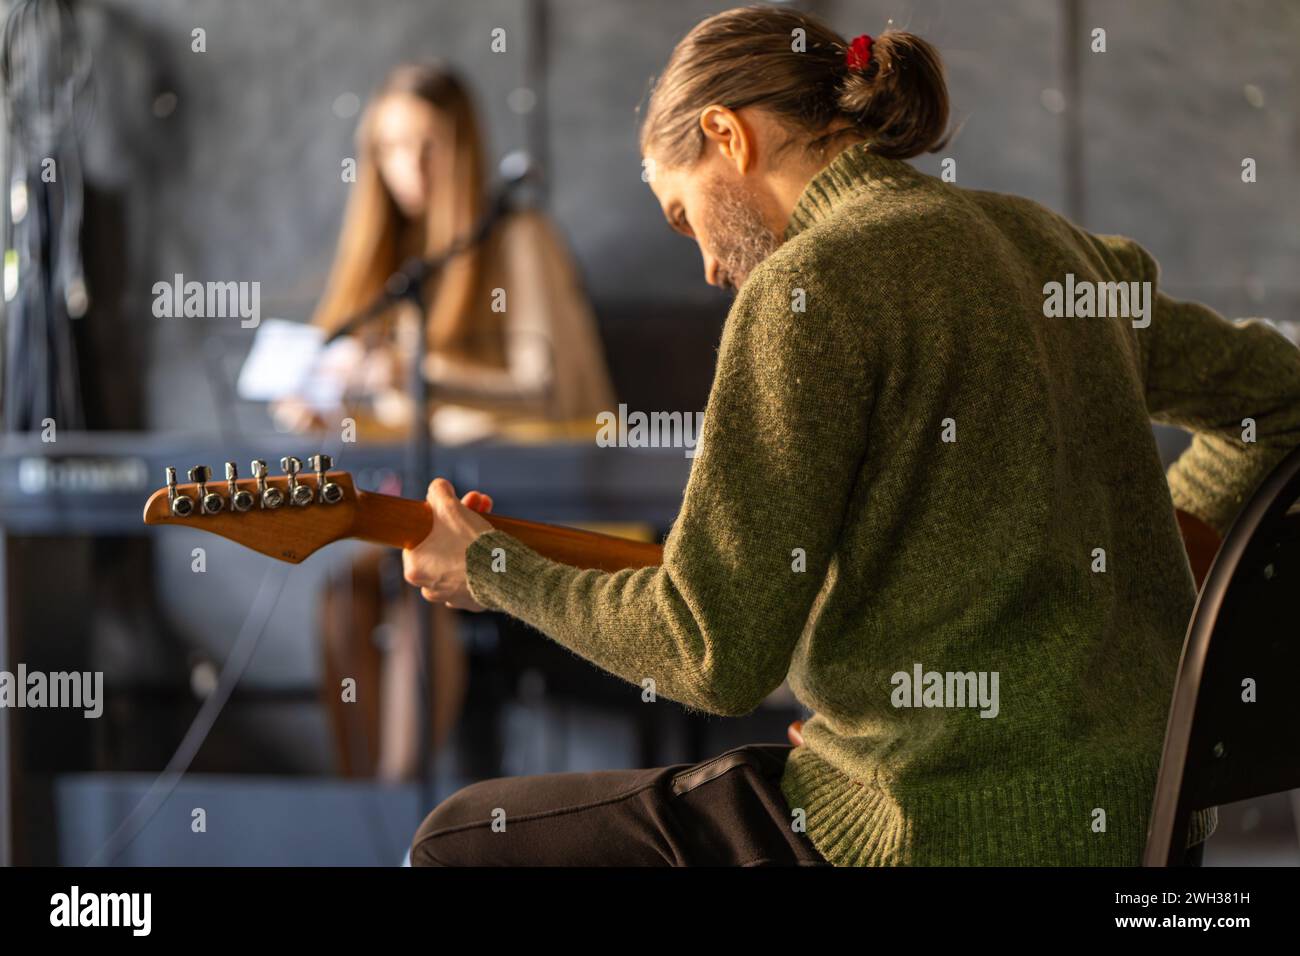 Musician sitting and entertaining event with music, playing electric guitar, plucked string instrument. Stock Photo